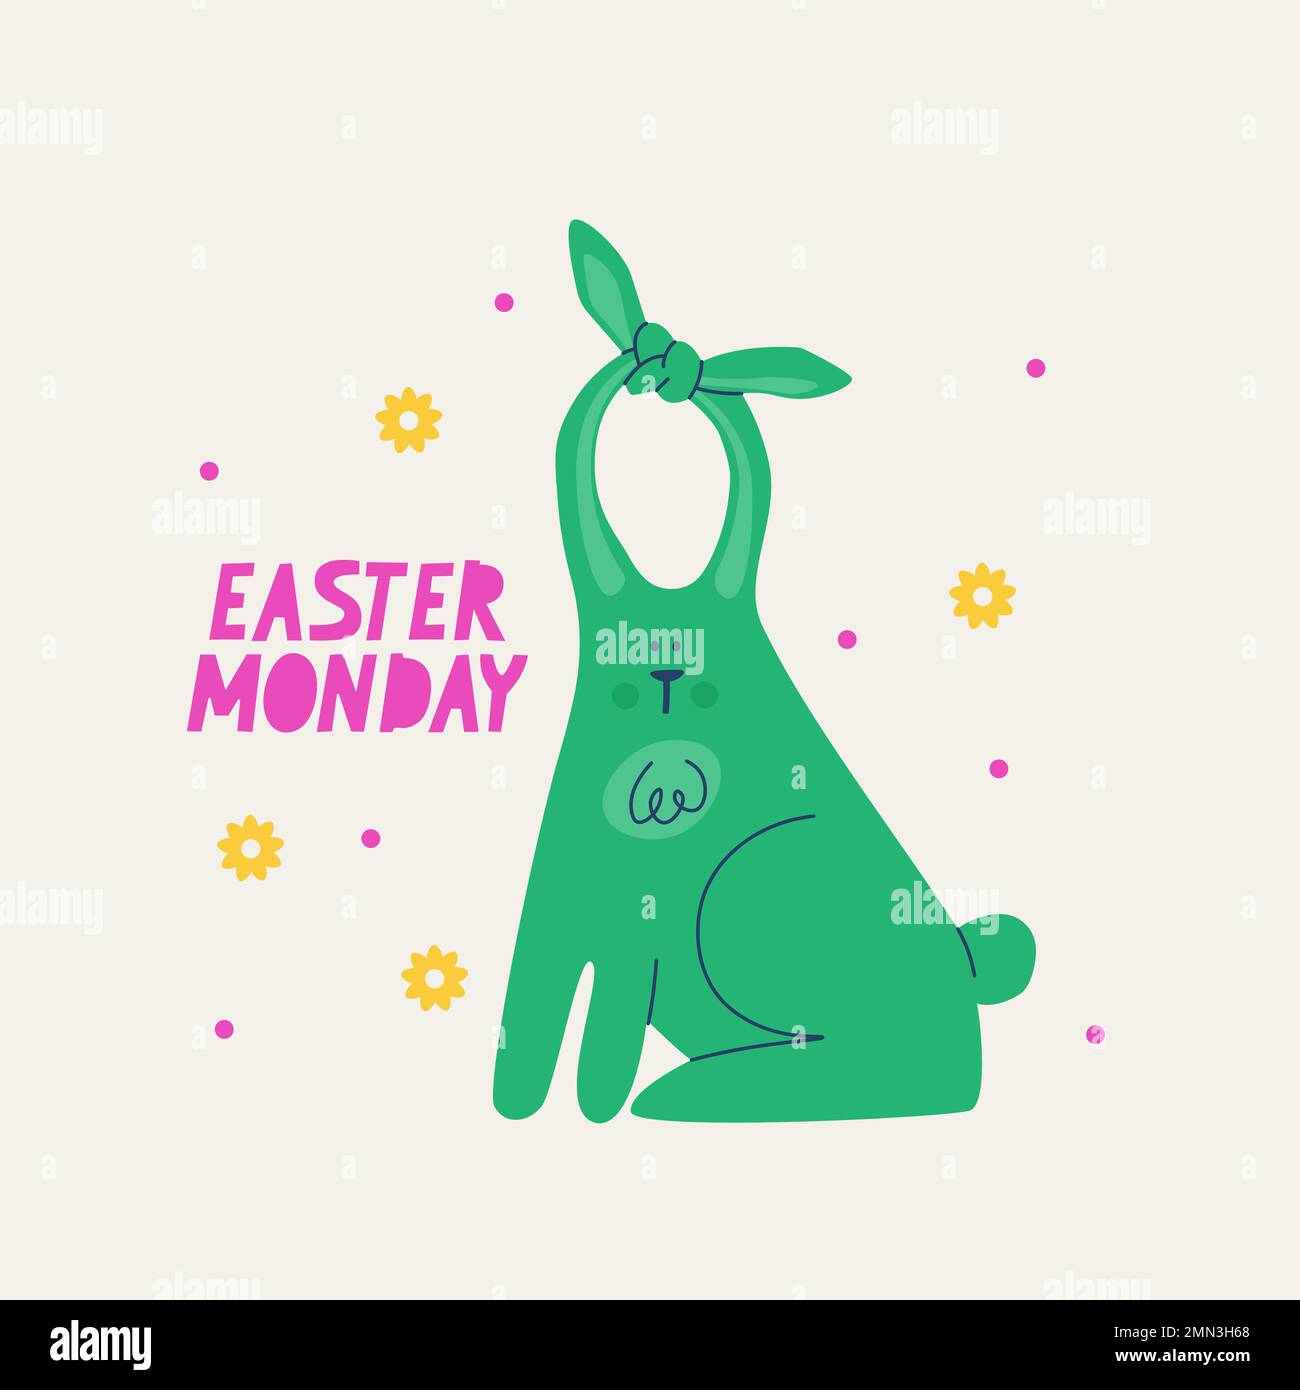 Cute funny green easter bunny with tied ears. Easter Monday postcard. Vector multicolored trendy illustration. Stock Vector